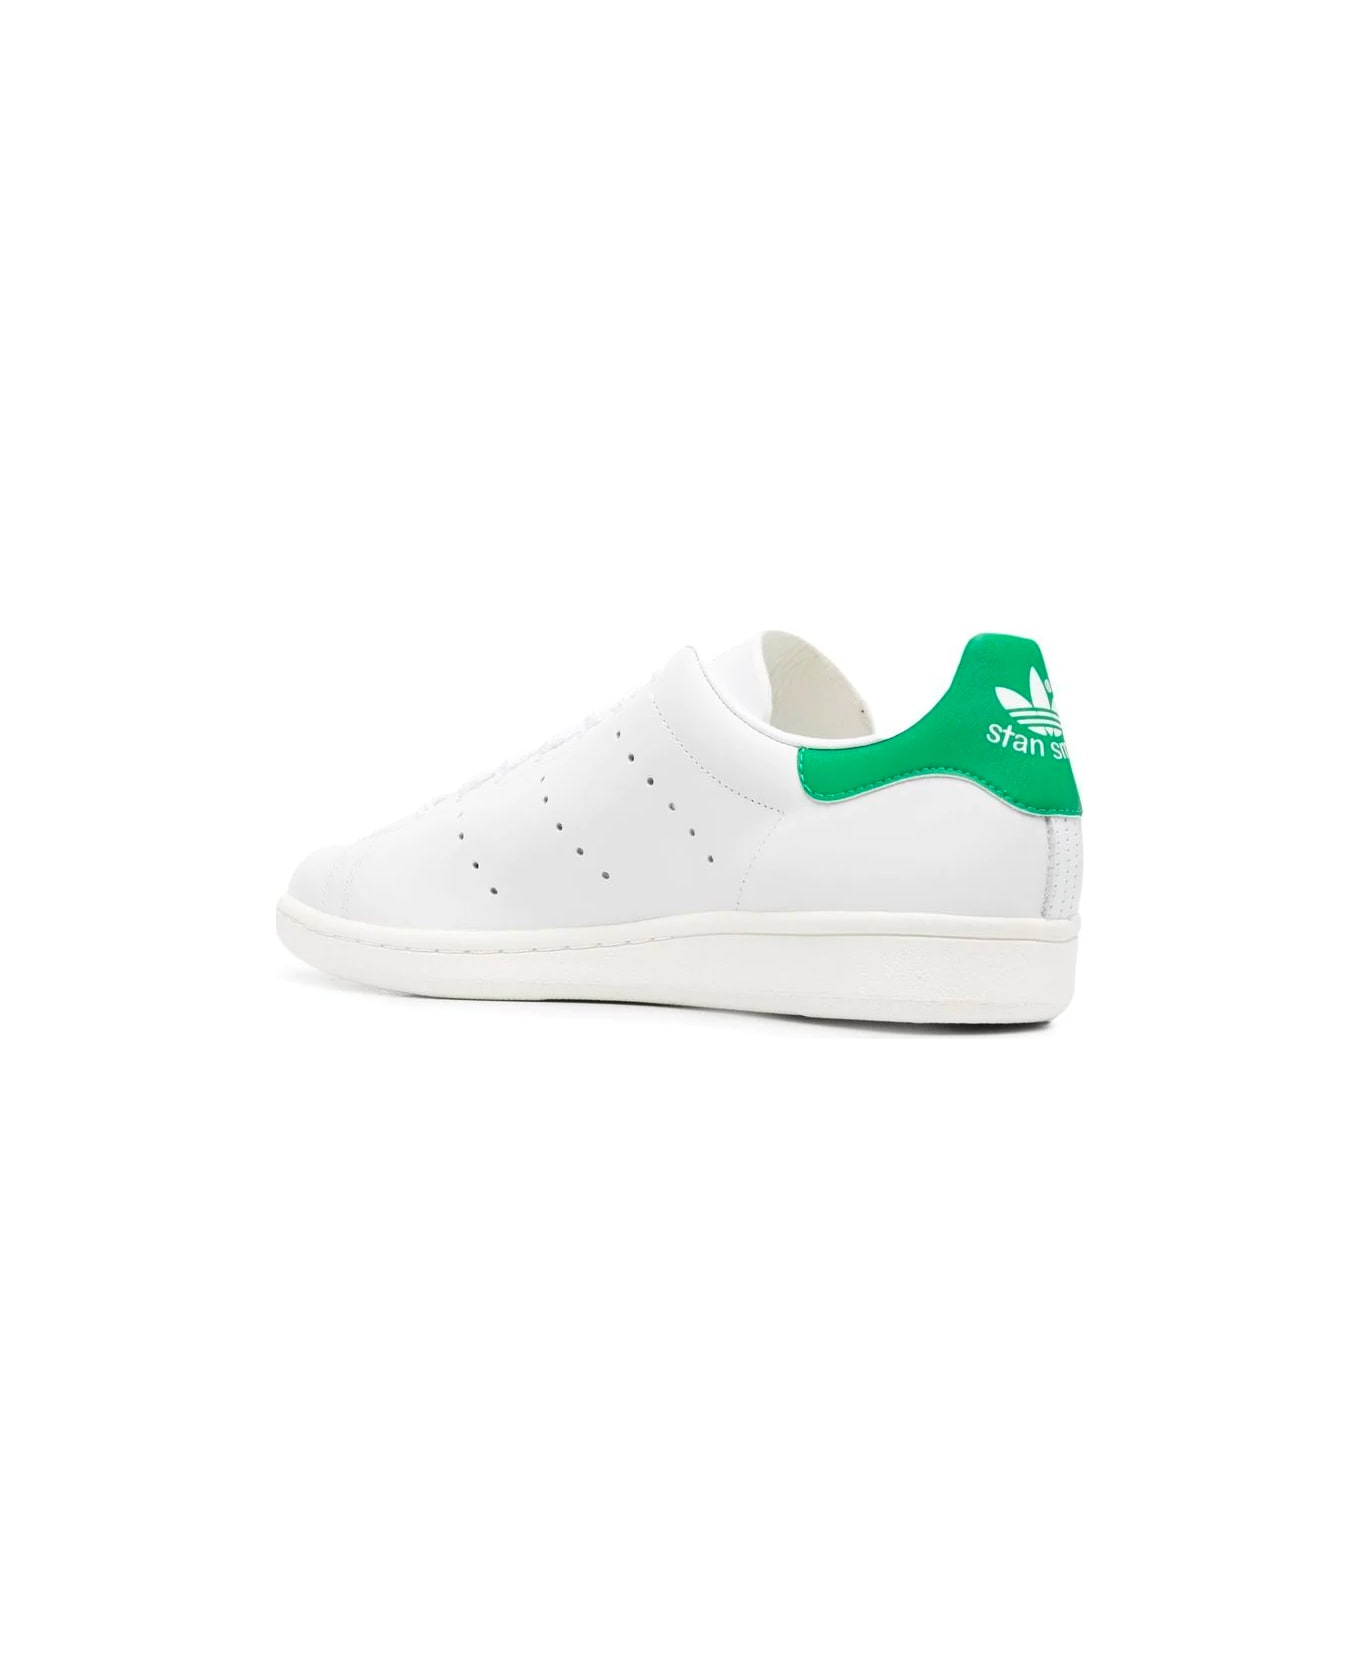 Adidas Stan Smith 80s Sneakers - Ftwwht Ftwwht Green スニーカー